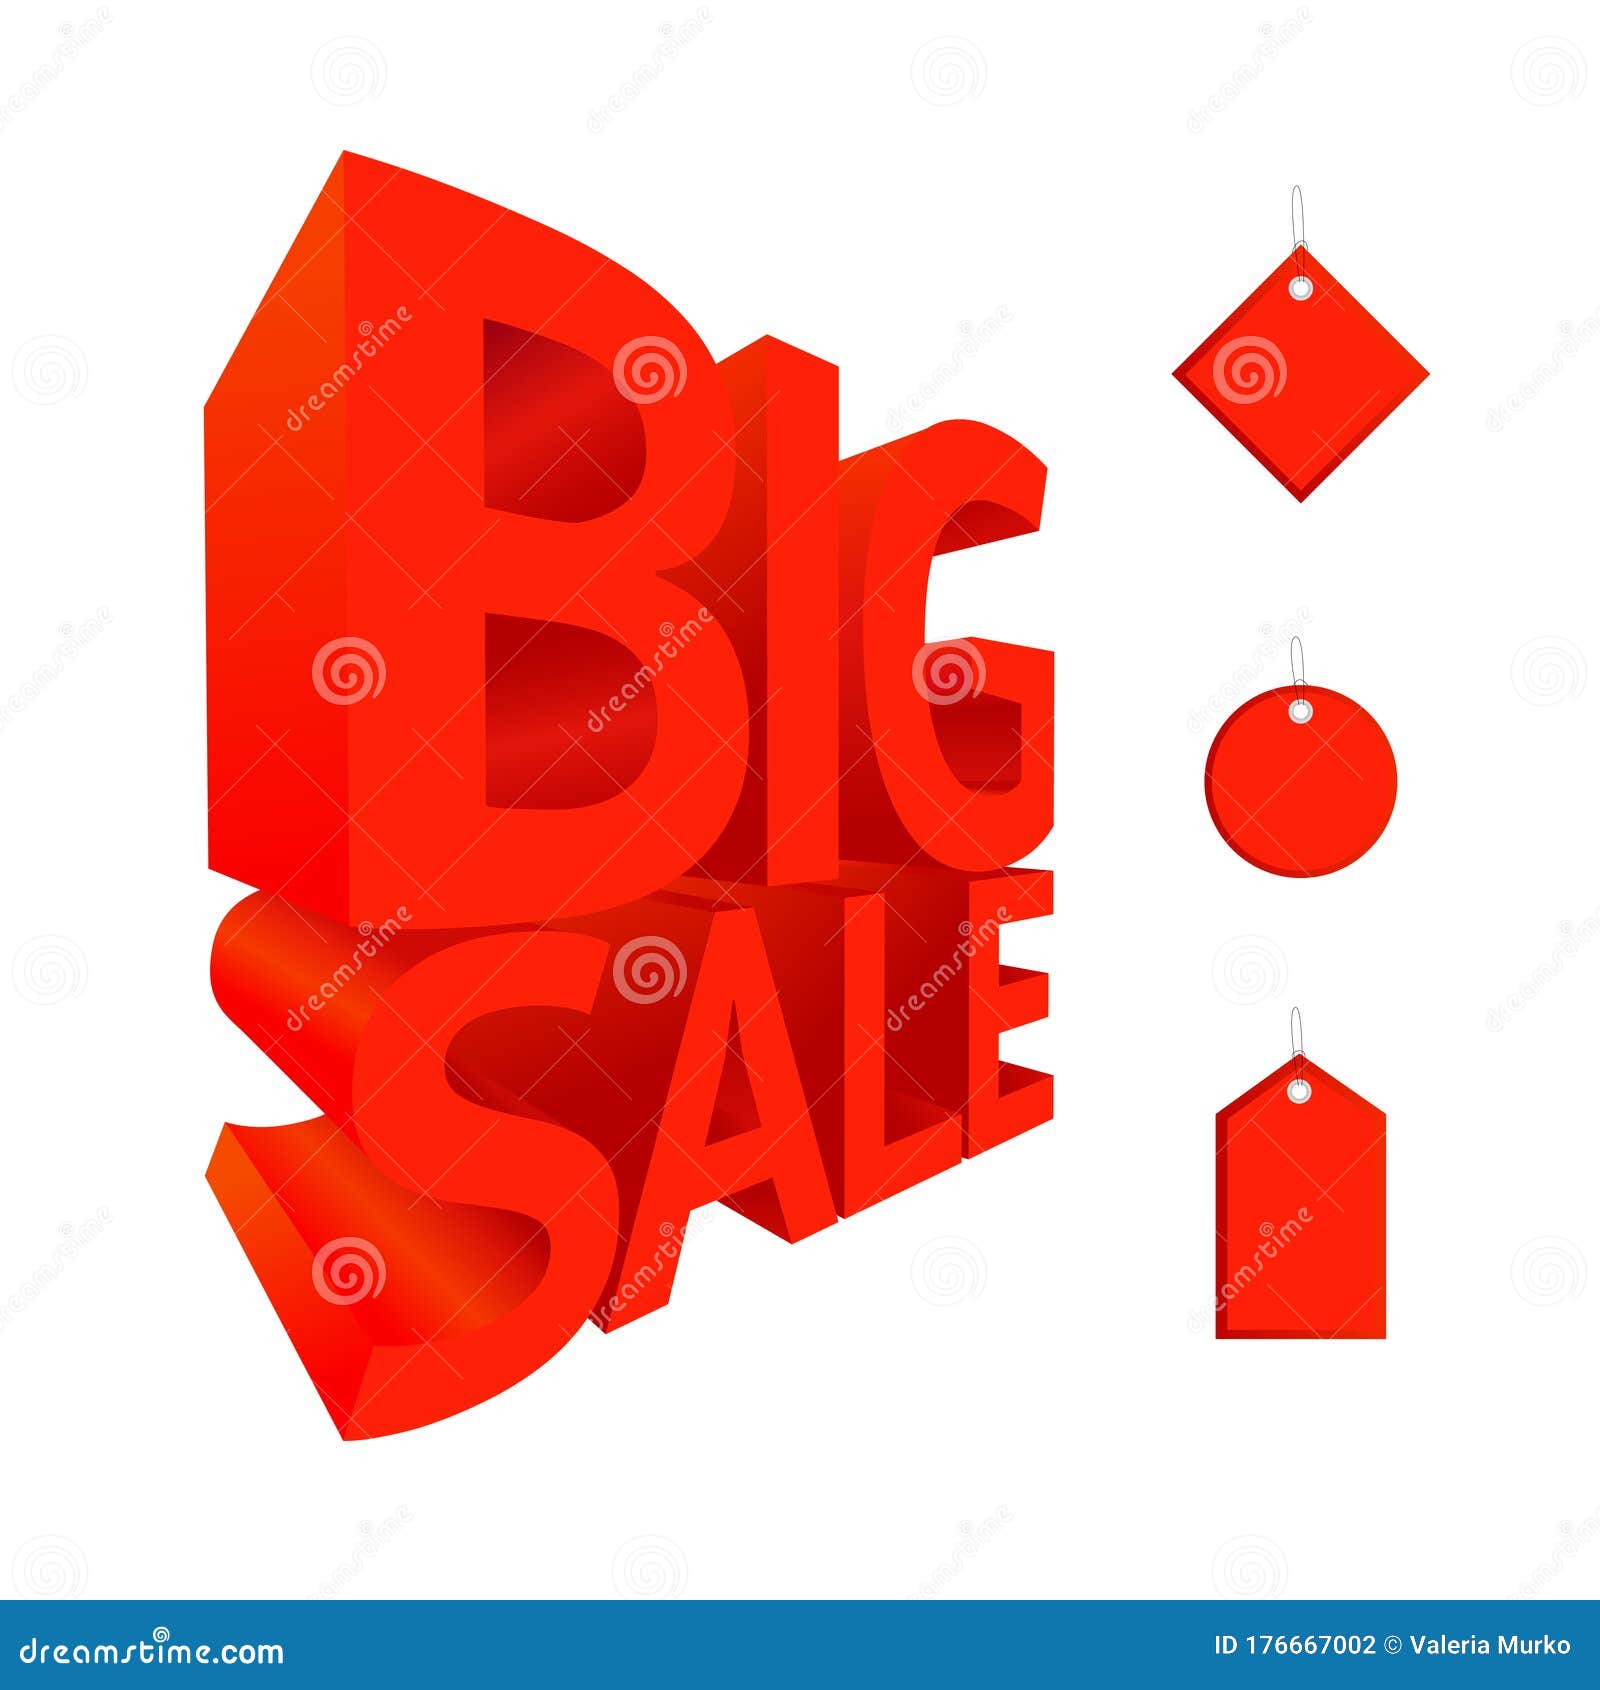 Big Sale Sale s Letters Big Sale Red Style Stock Vector Illustration Of Discount Black